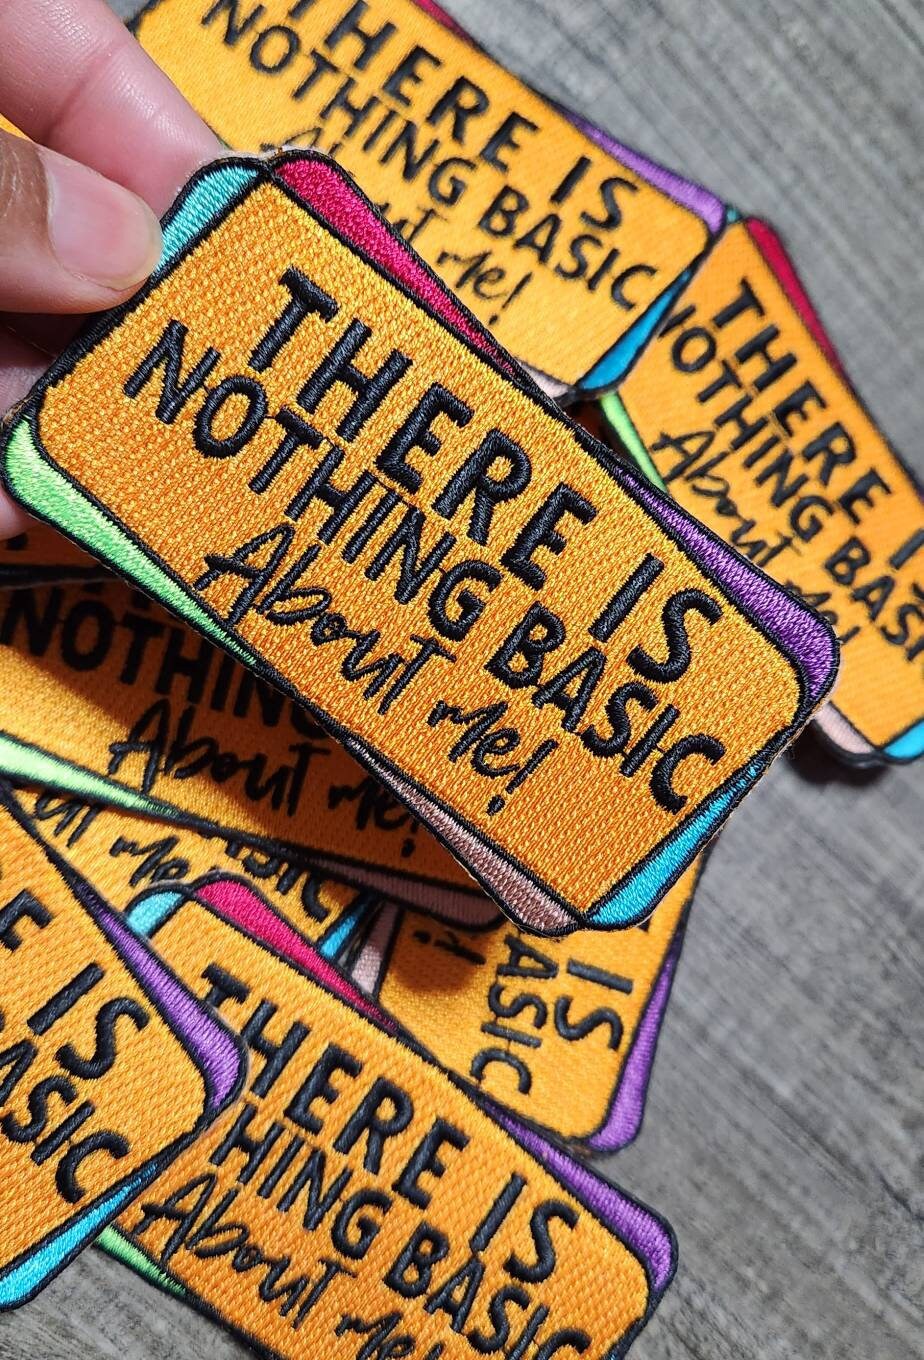 NEW, 1-pc, "There is Nothing Basic About Me" Statement Badge, Iron-on Embroidered Patch, Cool Applique for Clothing, Size 3, Colorful Patch